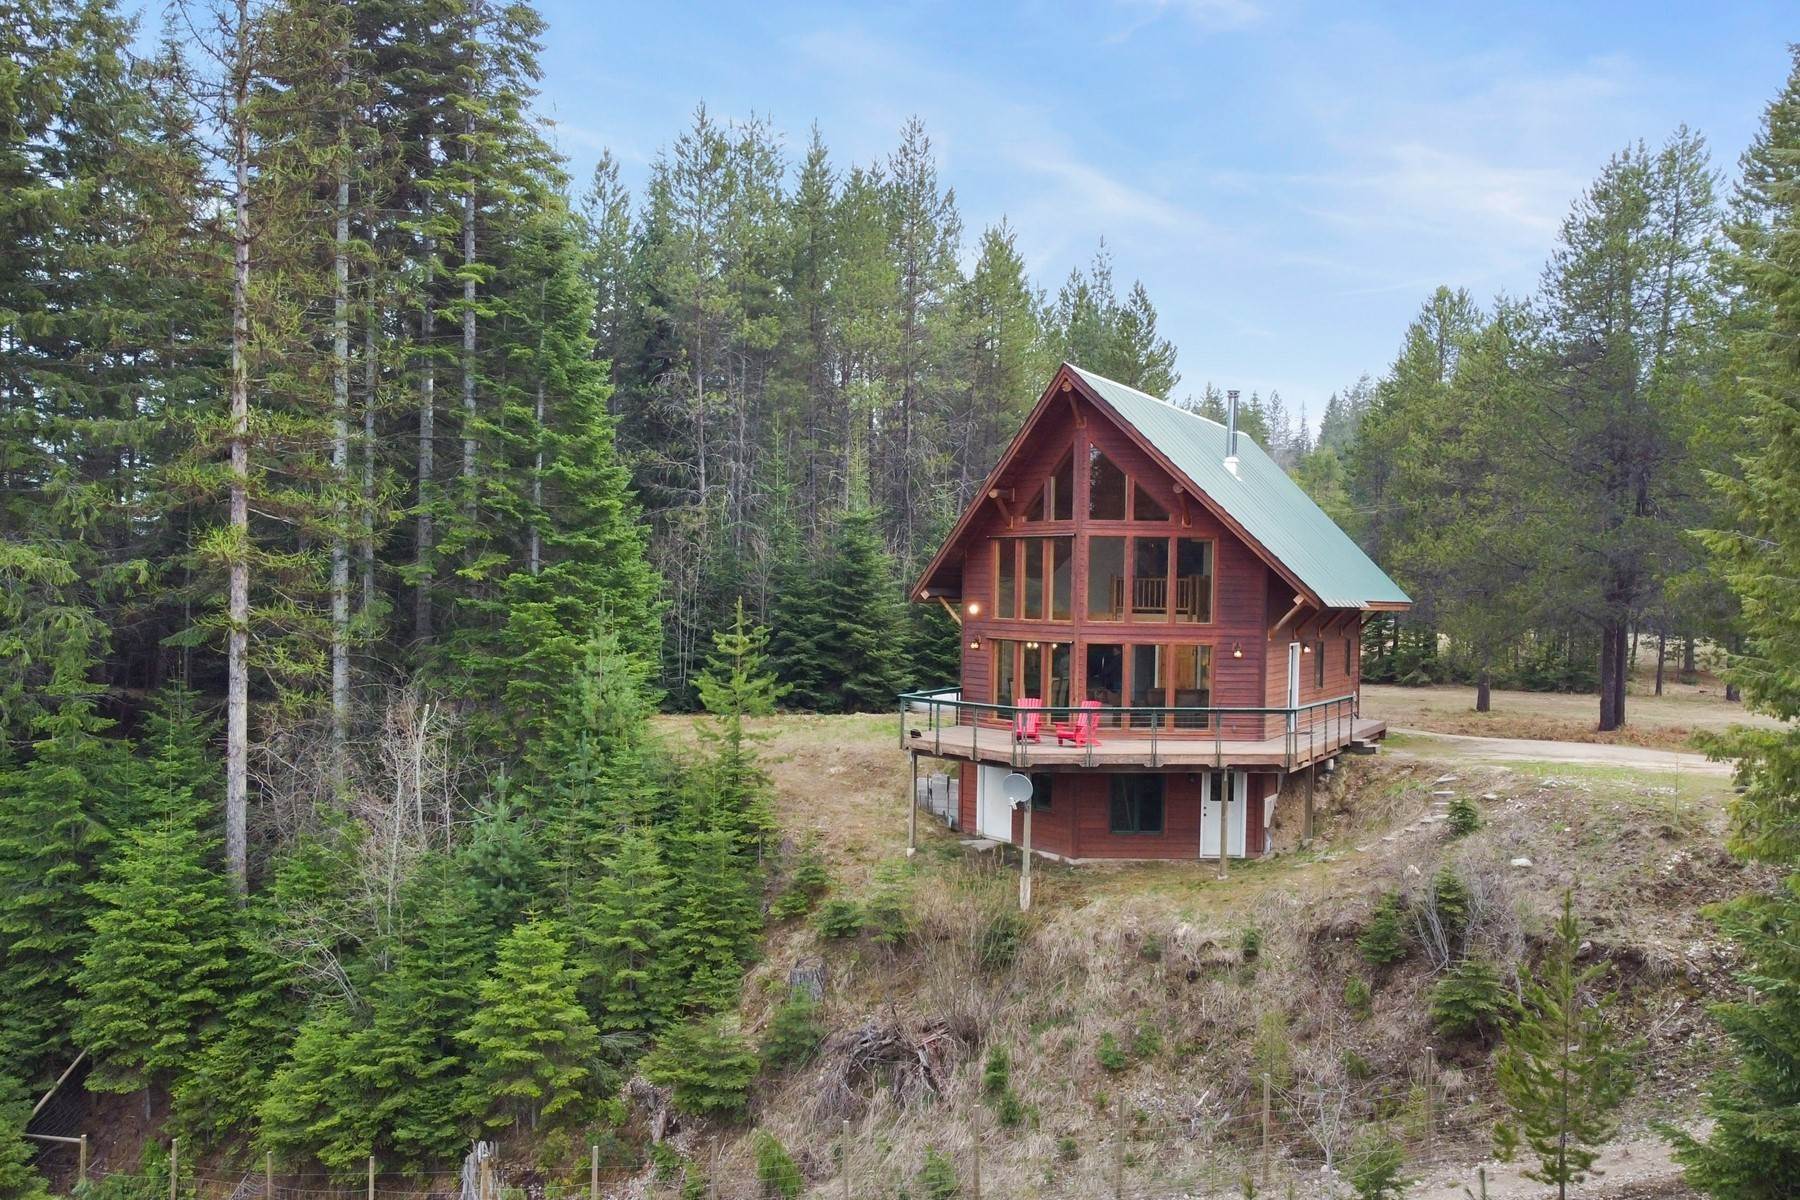 Single Family Homes for Sale at 5359 Gleason Mc Abee Falls Rd 5359 Gleason Mcabee Falls Rd Priest River, Idaho 83856 United States